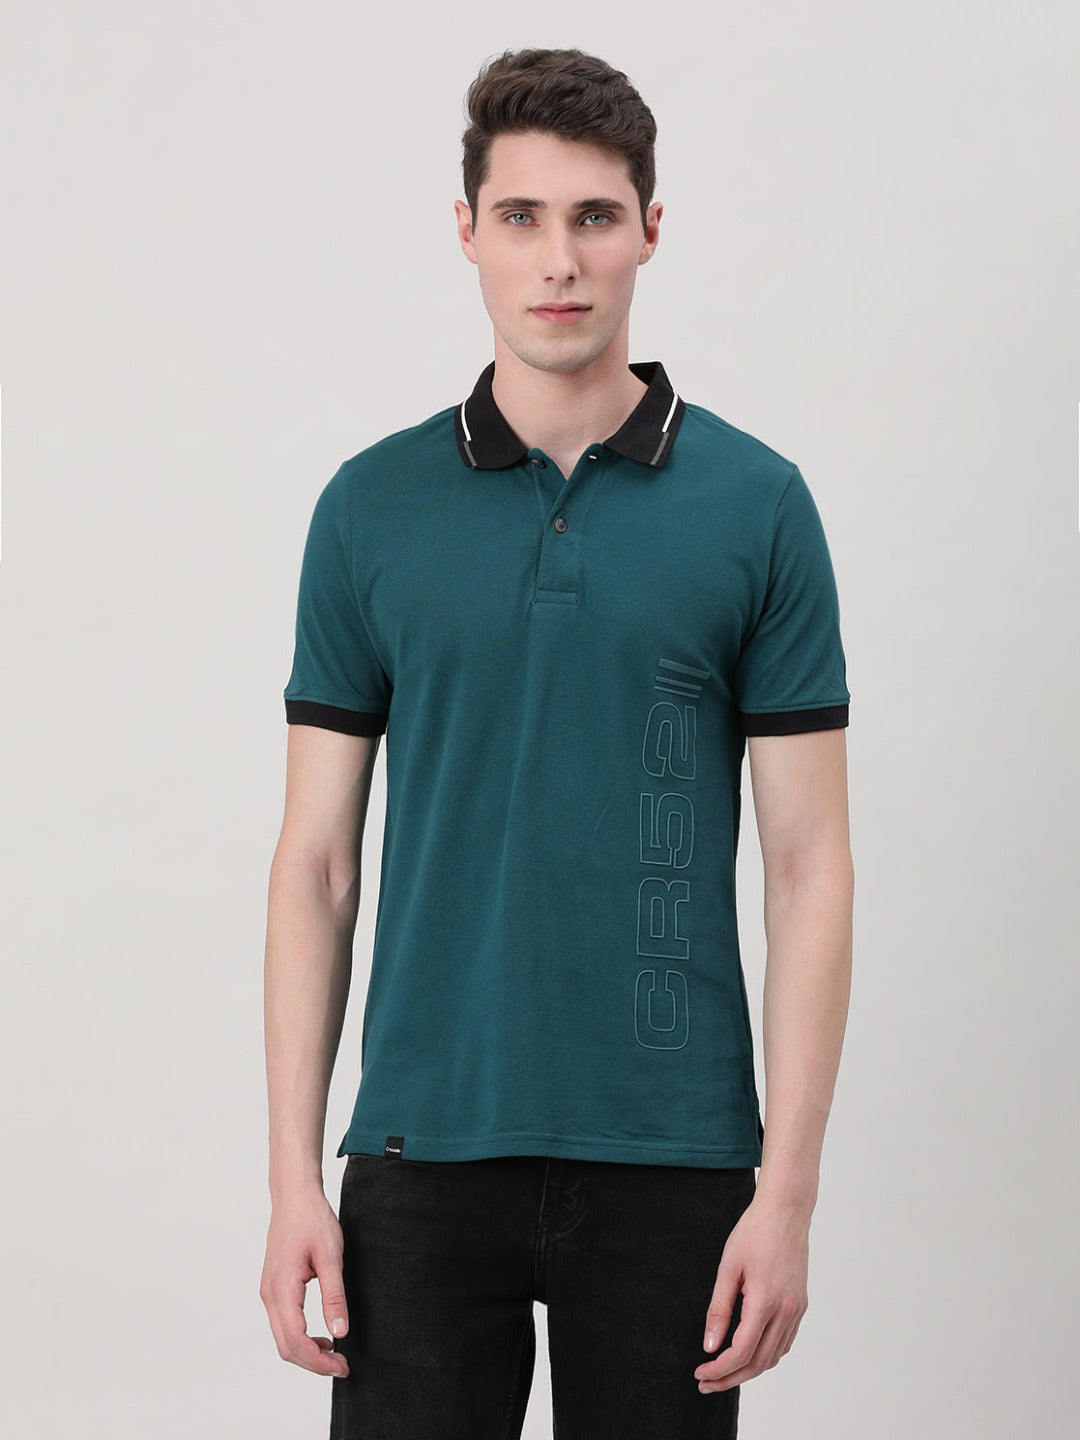 Casual T-Shirt Half Sleeve Slim Fit Solid Printed with Collar Teal for Men